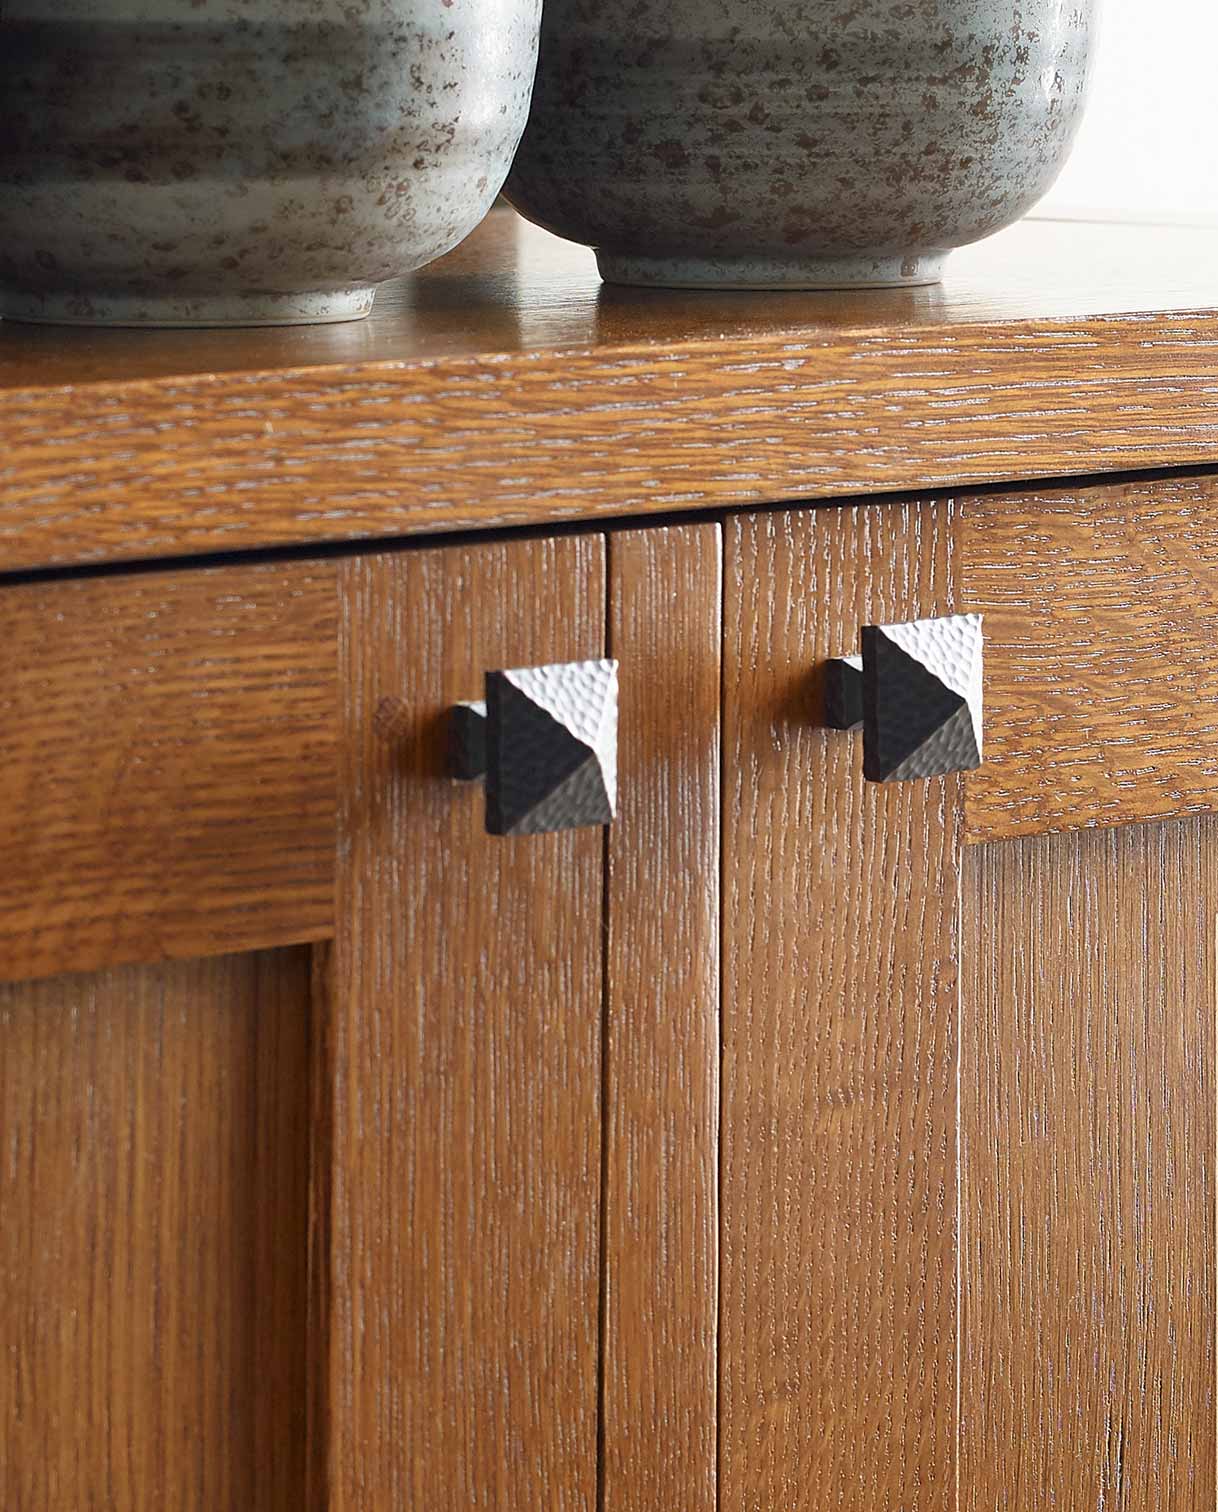 A closeup of hammered pyramidal knobs used on some Mission furniture pieces